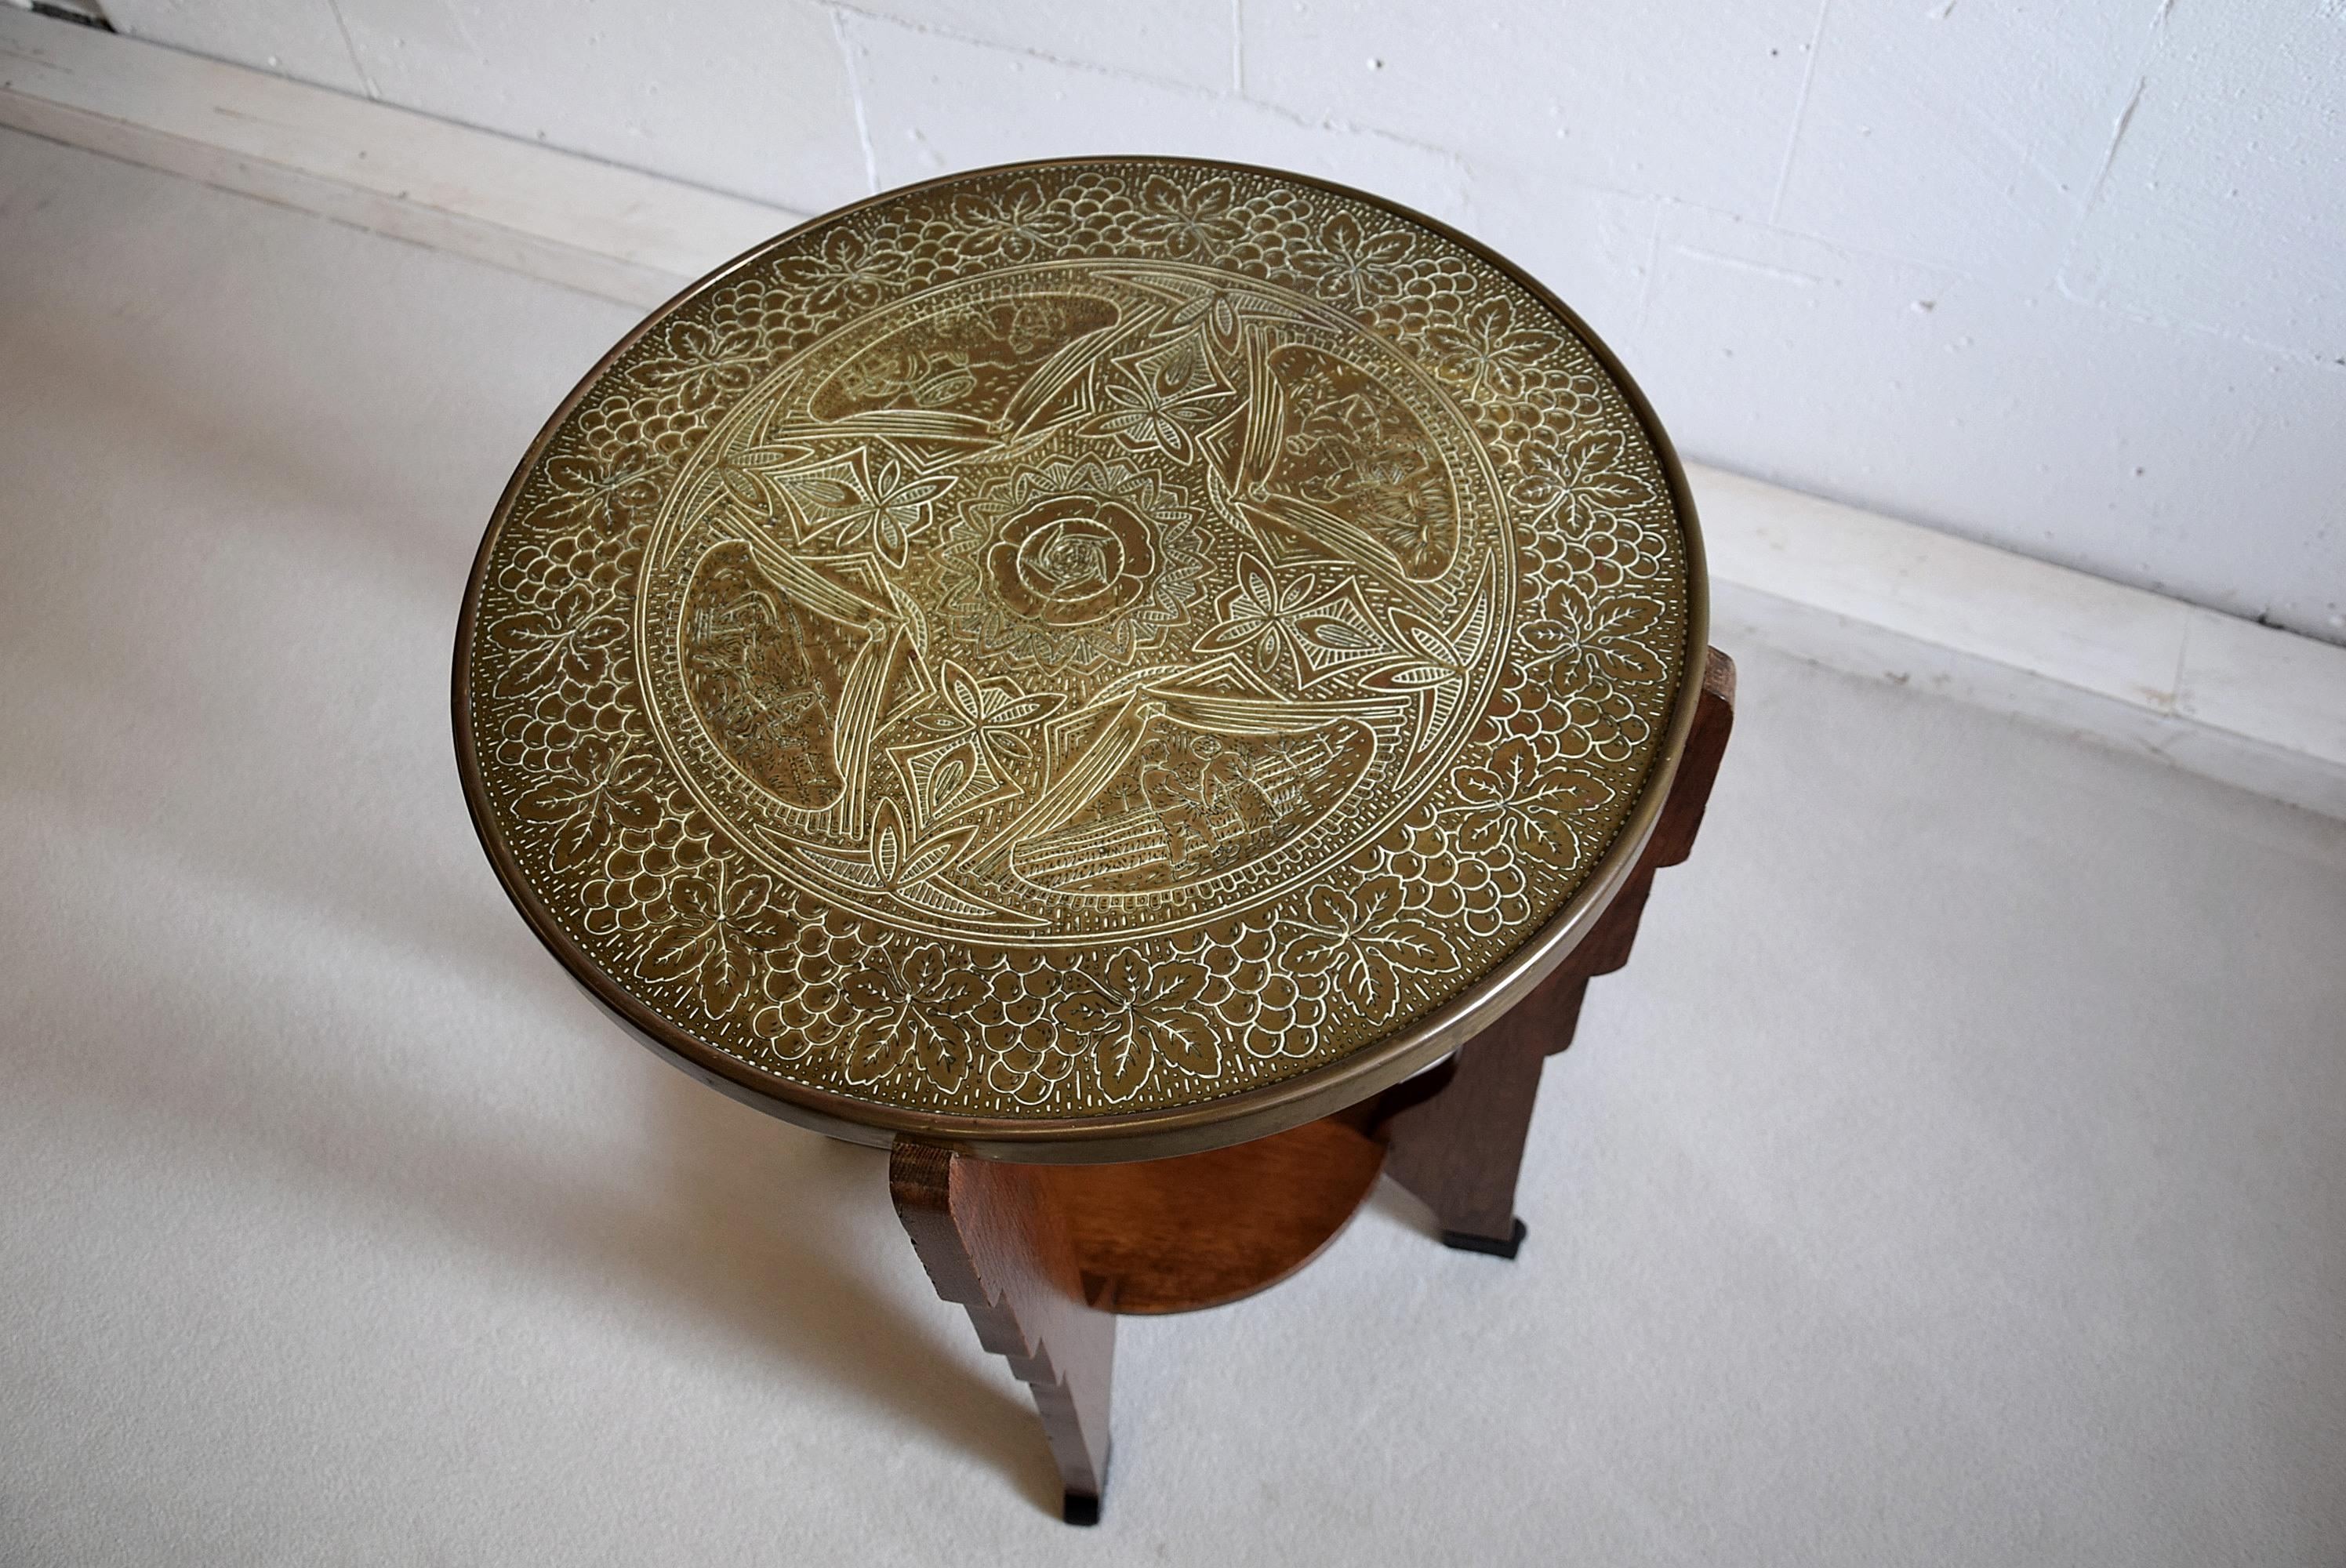 Brass and oak Amsterdam School Art Deco side table. Gorgeous and rare, made in the Netherlands in the 1920s .

This table will be shipped overseas in a custom made wooden crate. Cost of transport to the US crate included is Euro 450.